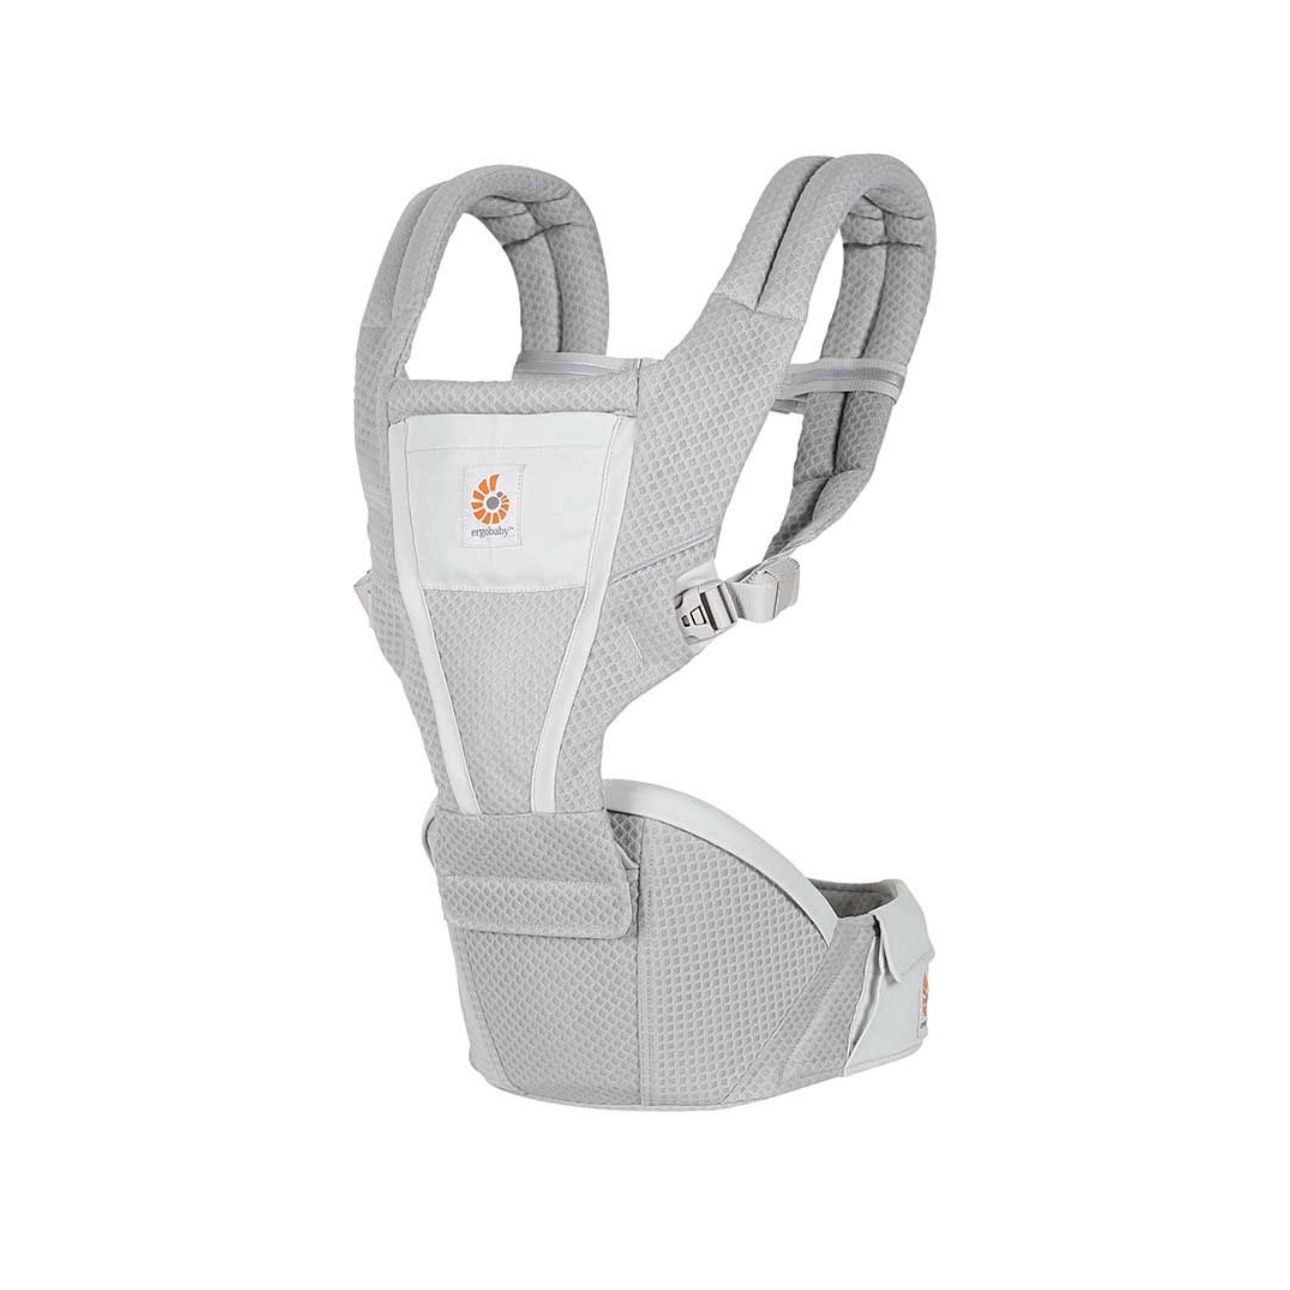 Ergobaby Hip Seat Baby Carrier - Pearl Grey